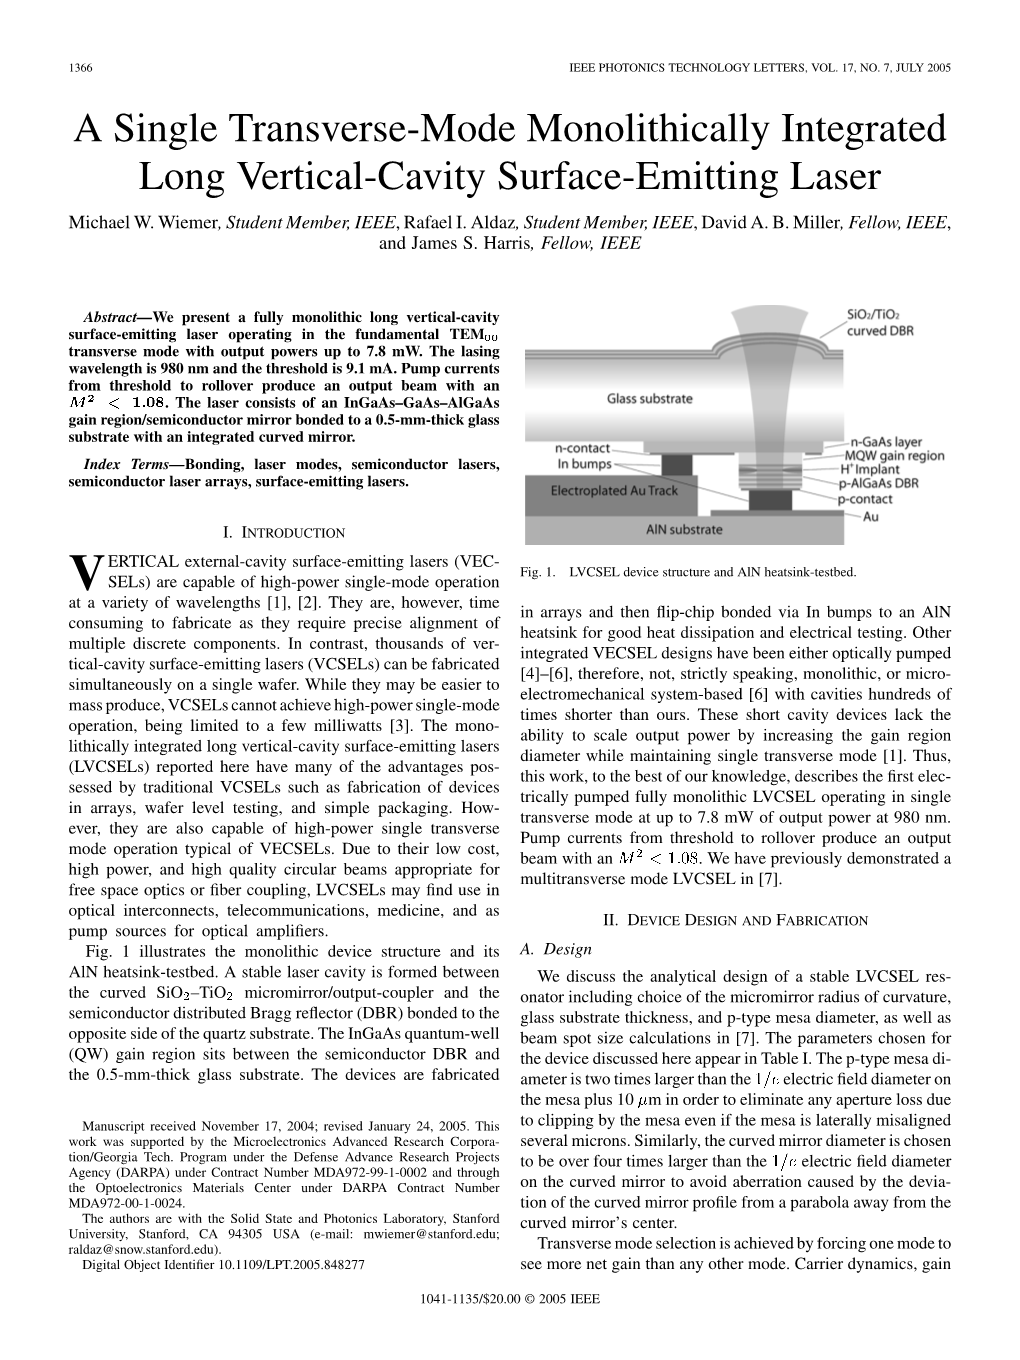 Single Transverse-Mode Monolithically Integrated Long Vertical-Cavity Surface-Emitting Laser Michael W